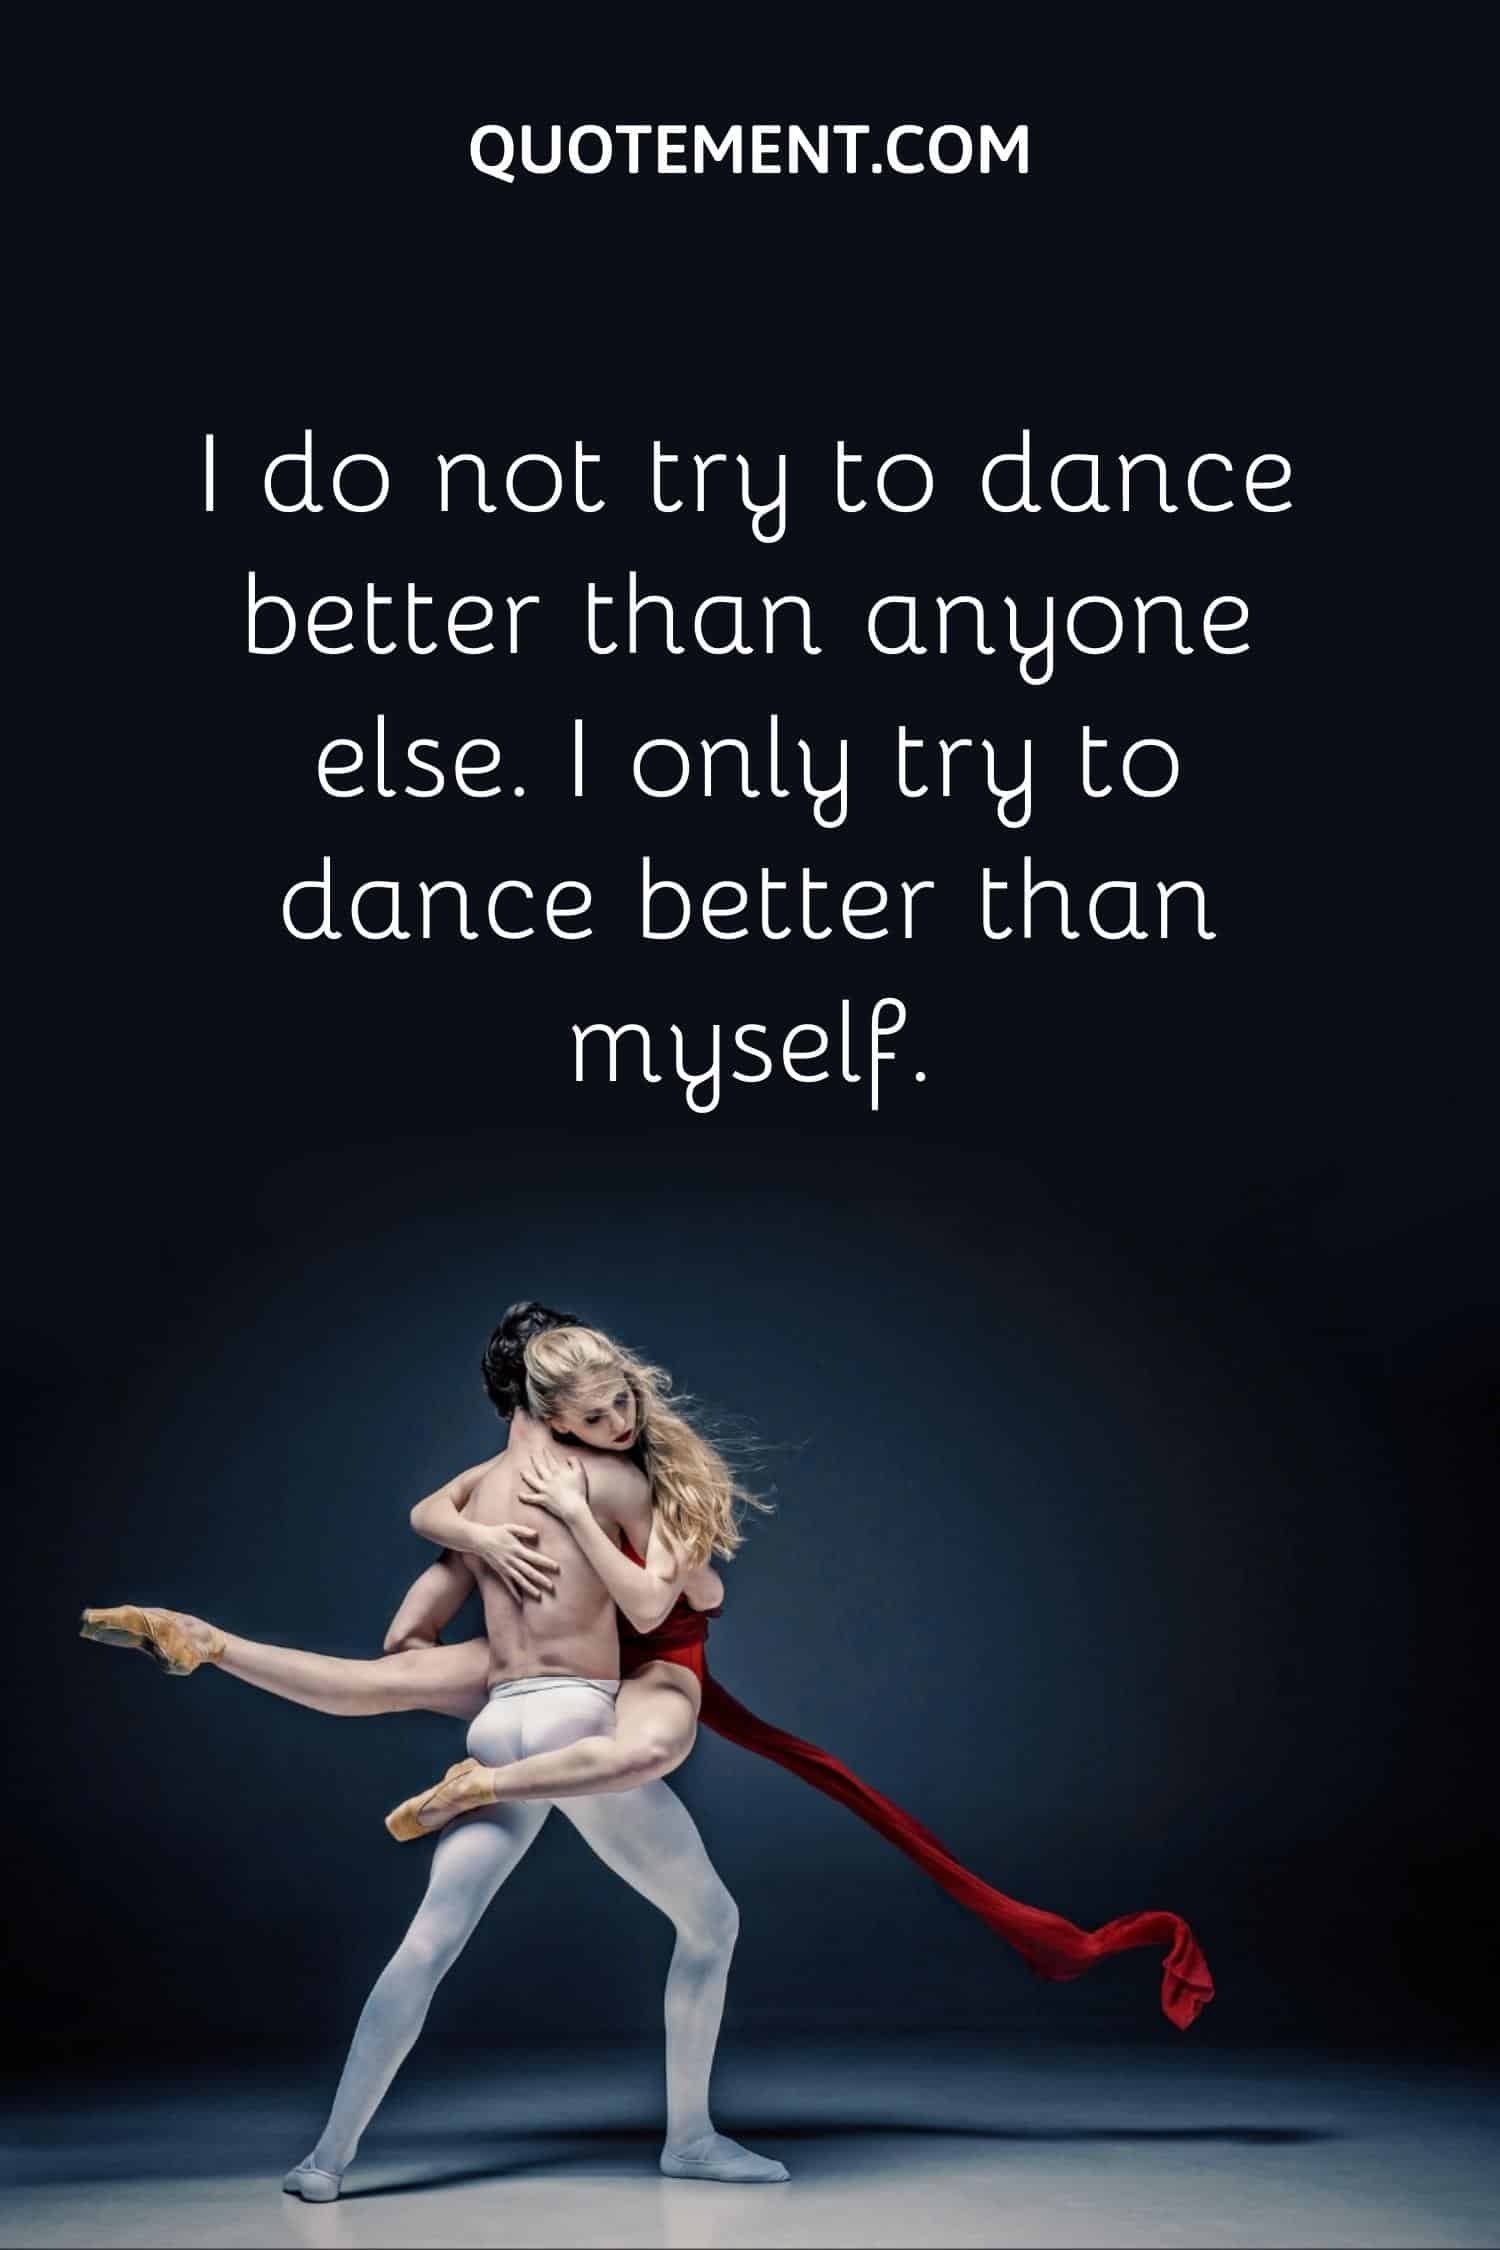 I do not try to dance better than anyone else.